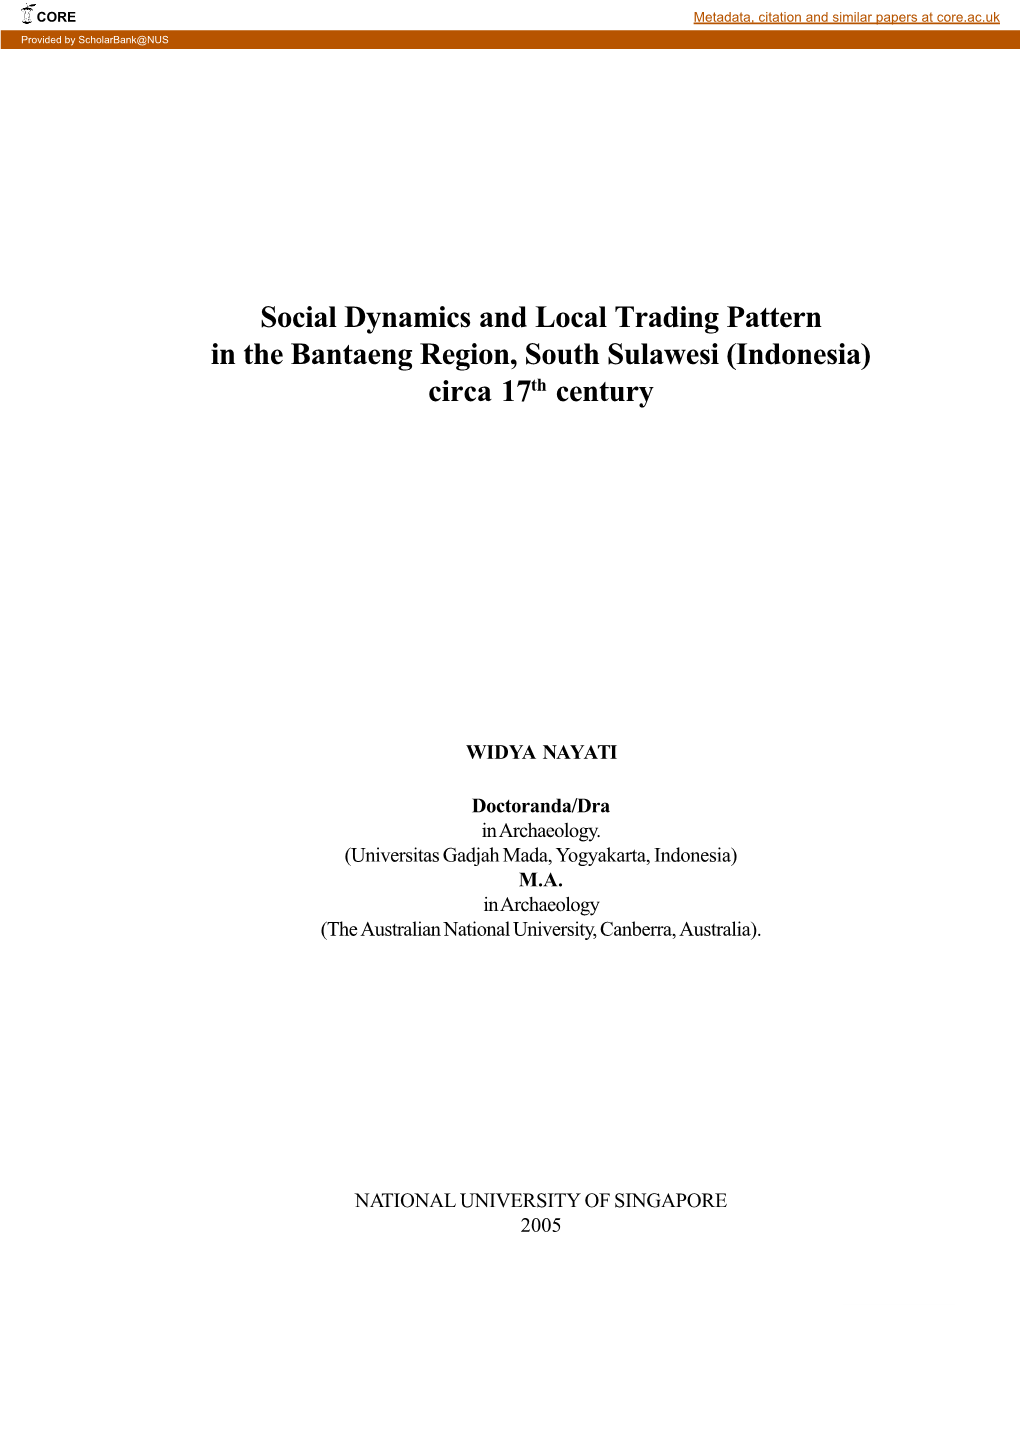 Social Dynamics and Local Trading Pattern in the Bantaeng Region, South Sulawesi (Indonesia) Circa 17Th Century